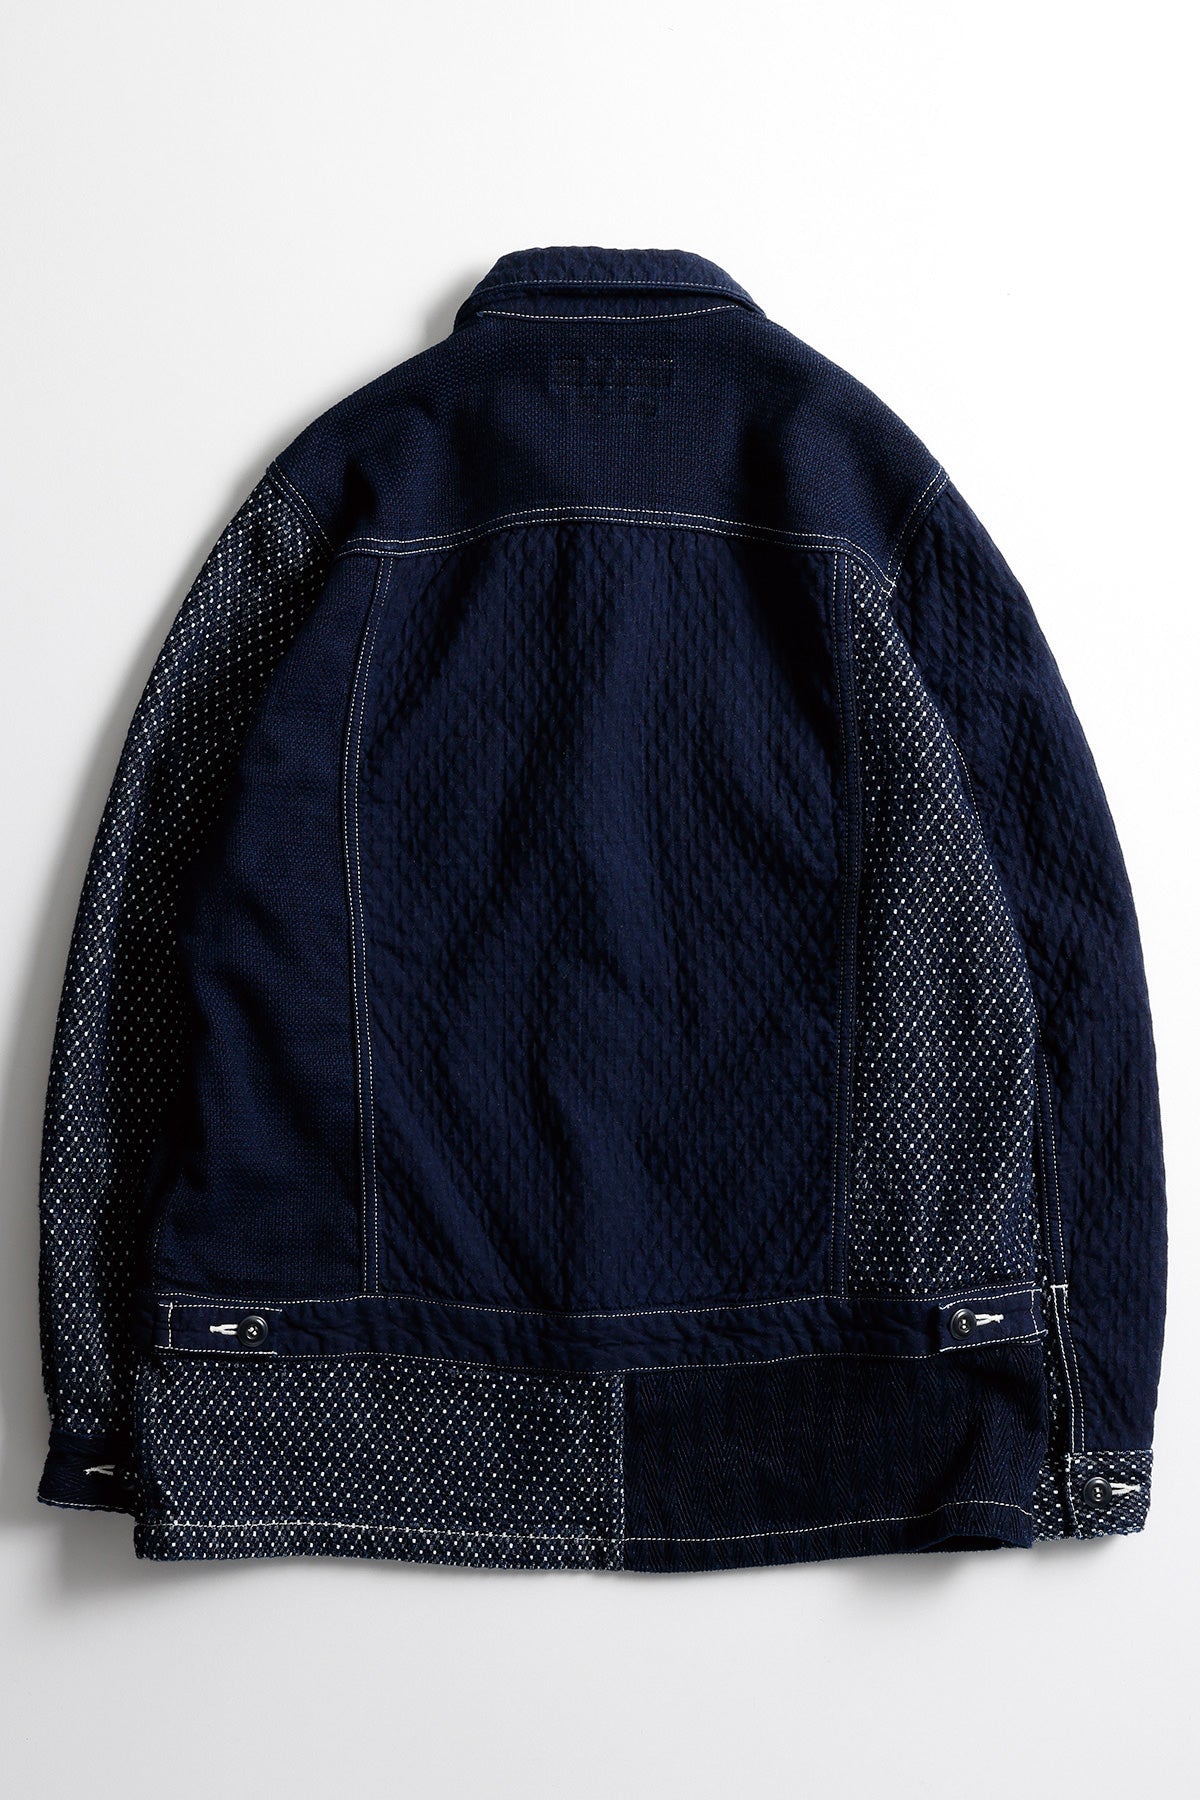 PATCHWORK 3RD JACKET RINSE